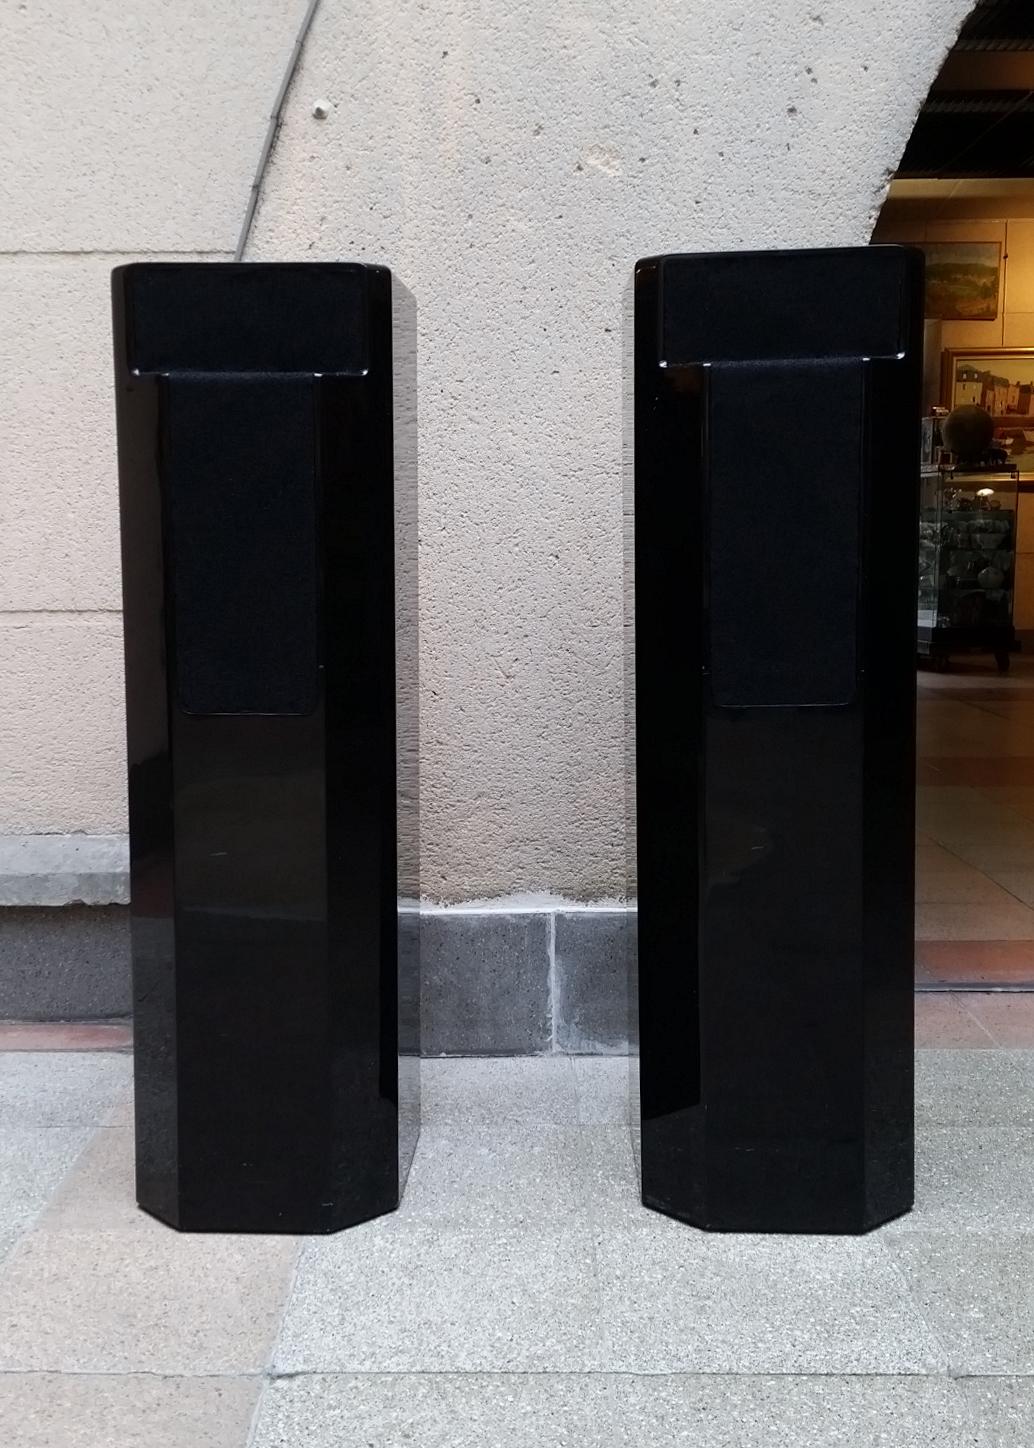 Pair of speakers Elipson 1303

circa 1982
Design by Raymond Loewy
Black color
